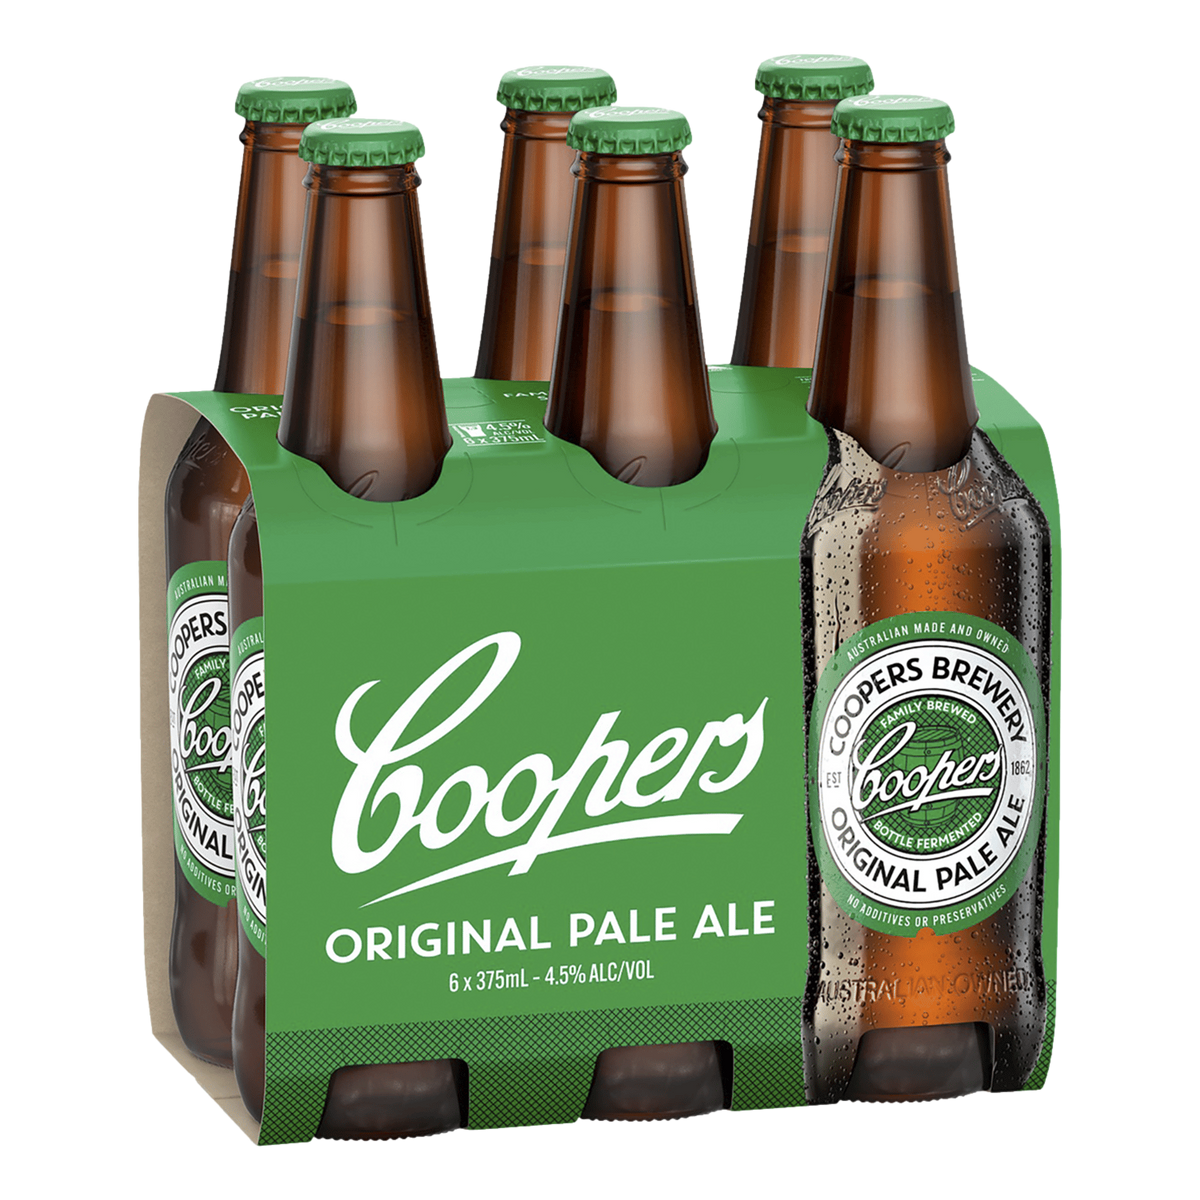 Coopers Pale Ale 375ml Bottle 6 Pack